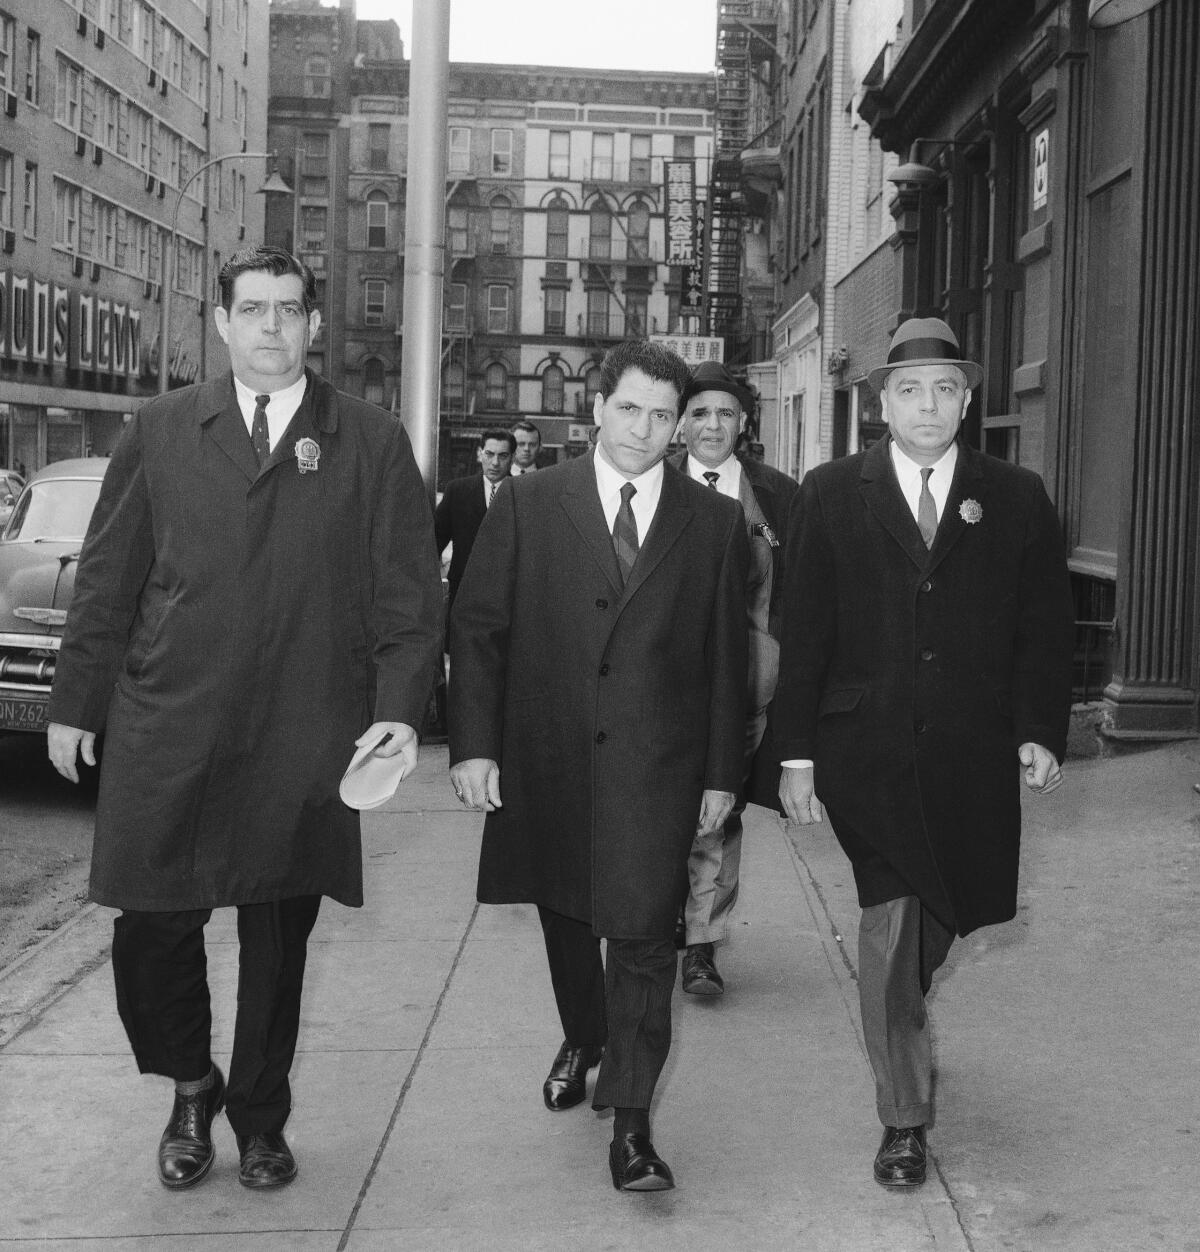 John "Sonny" Franzese, center, is escorted to the Elizabeth Street police station in New York after his arrest on a 43-count gambling indictment.